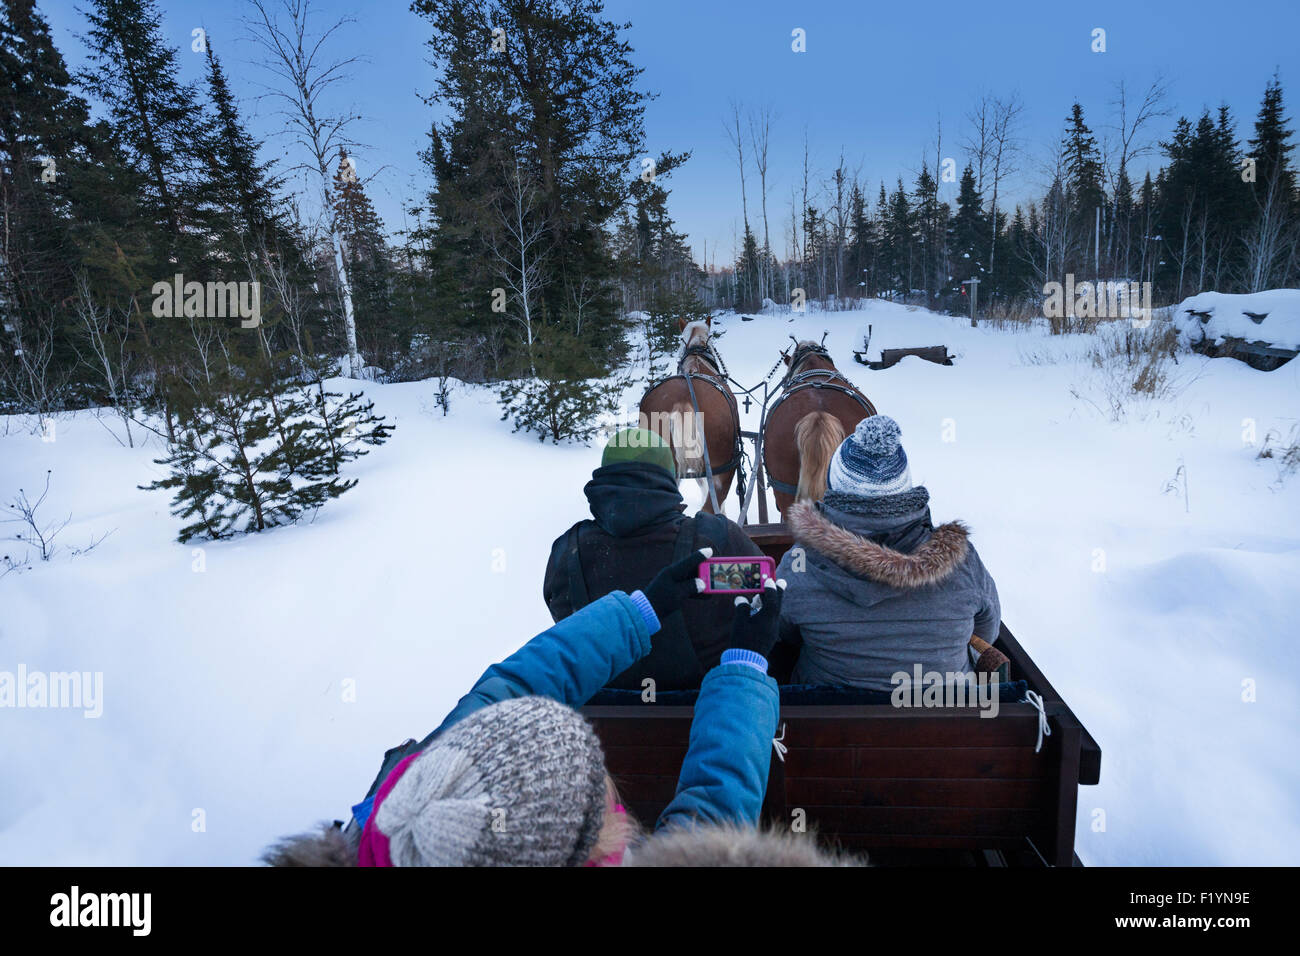 Belgium draft horses pull a sleigh through a snowy wilderness with pine trees in northern Minnesota in winter Stock Photo